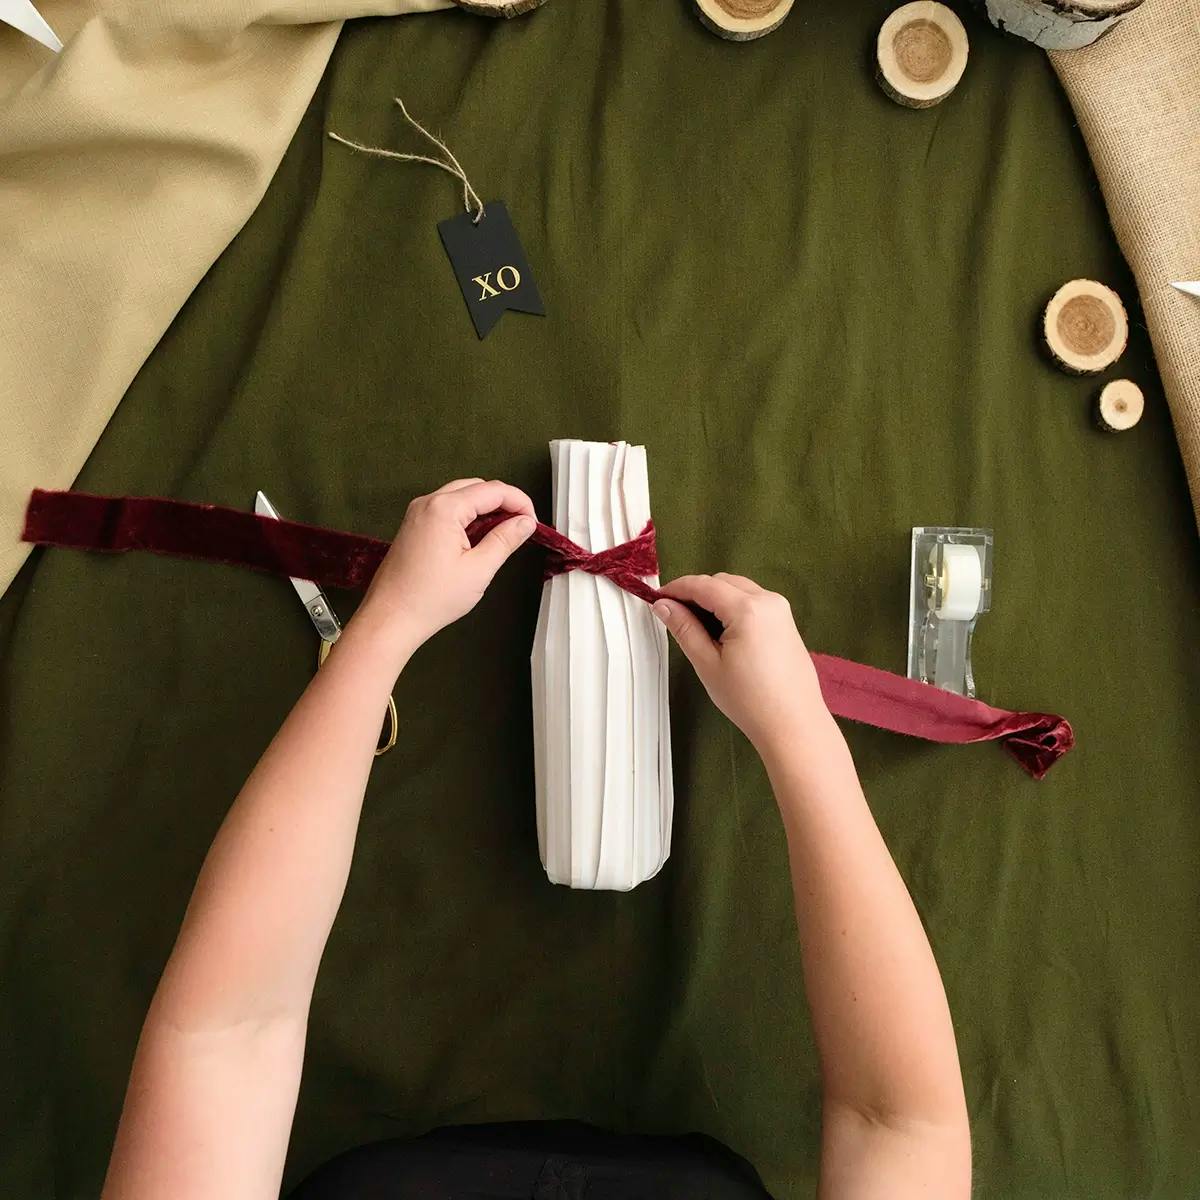 Tying a velvet ribbon around the neck of a wine bottle wrapped in pleats.